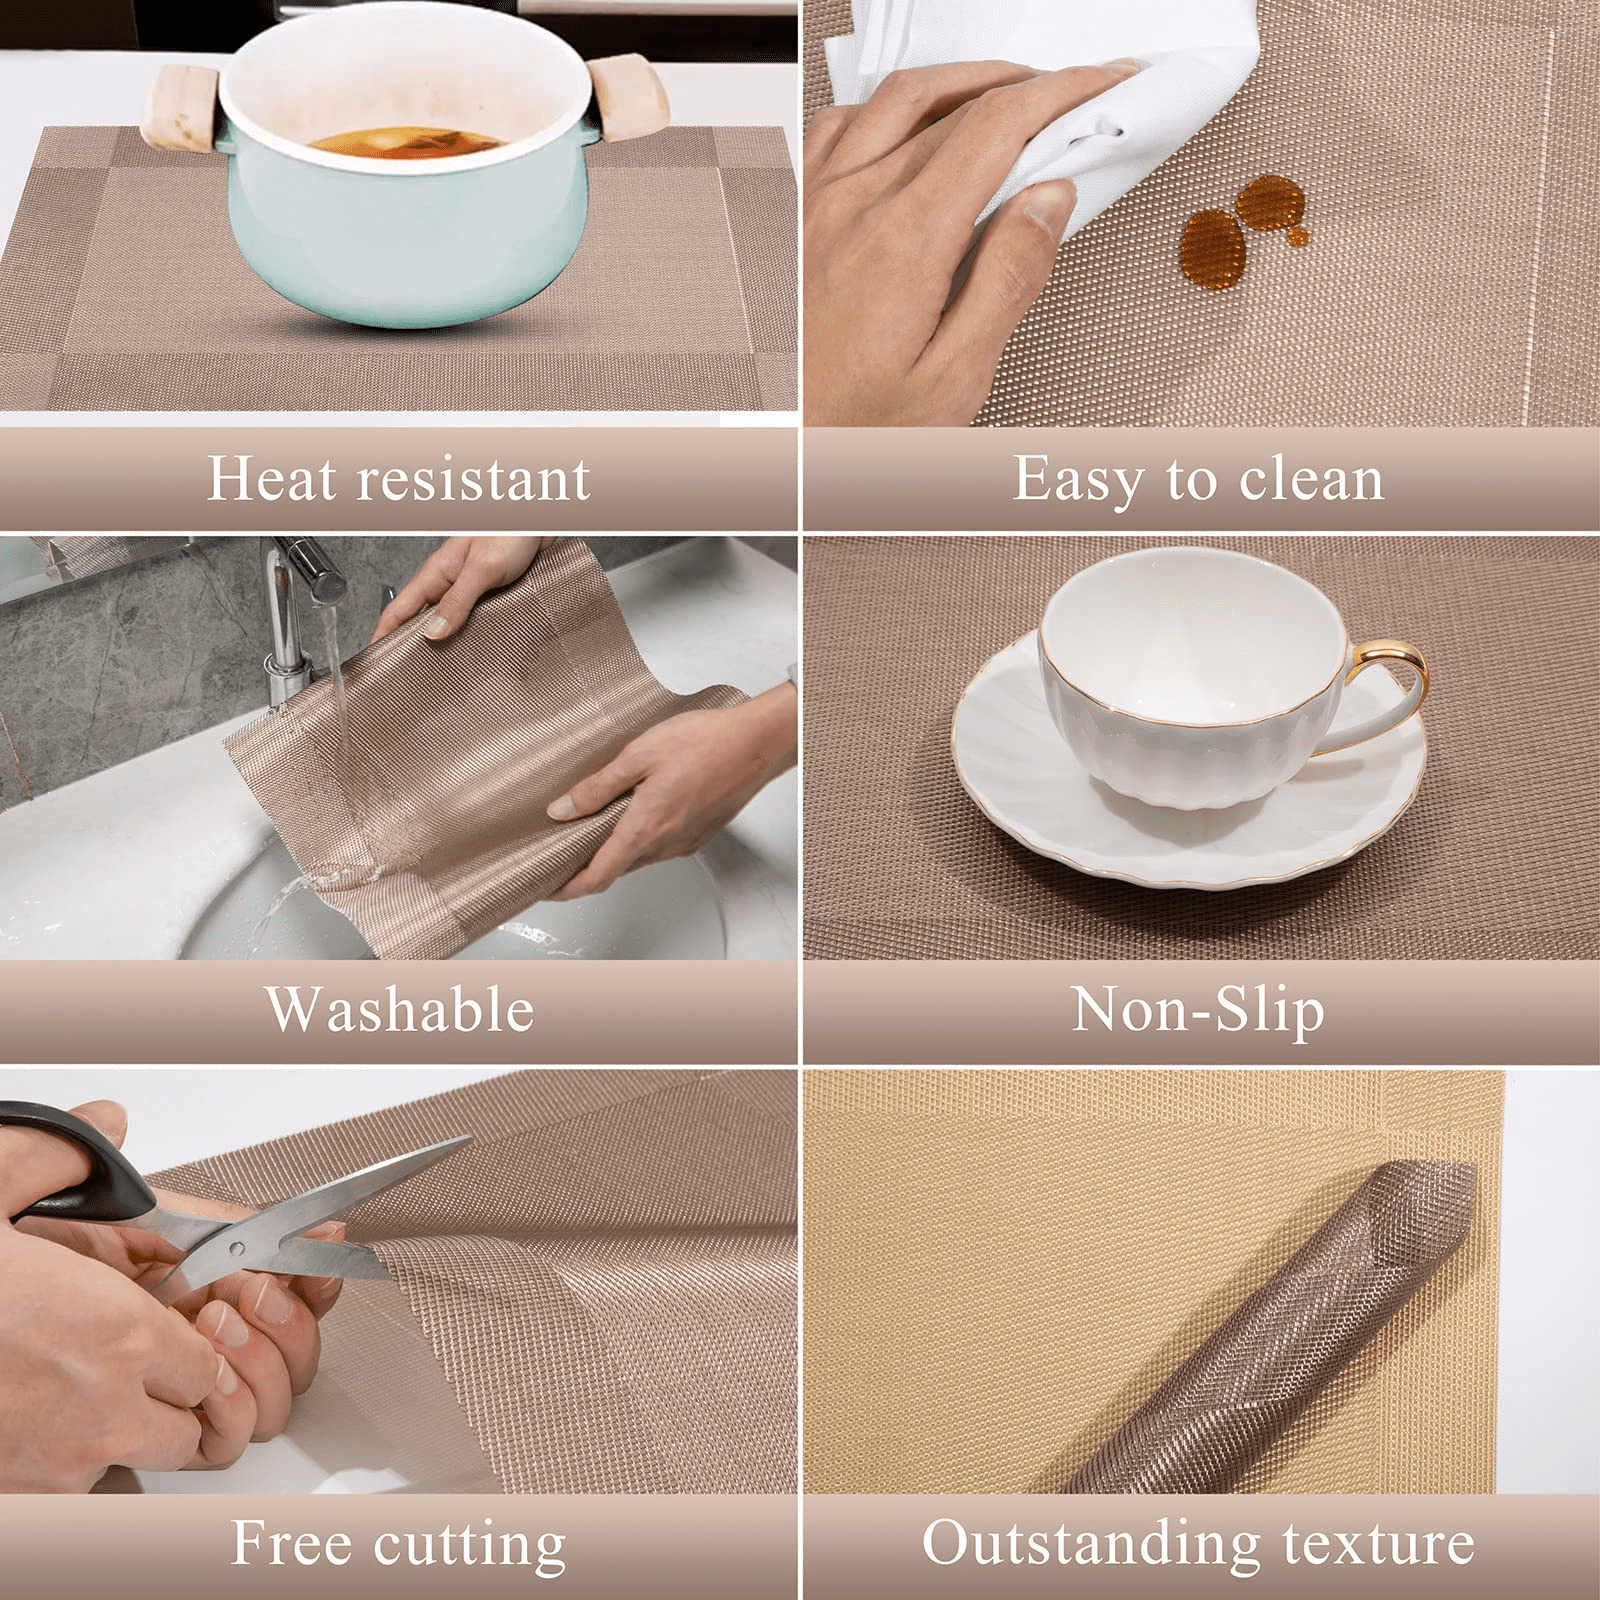 Ludlz Elegant Placemats Woven Vinyl Placemat Non-Slip Heat Resistant  Kitchen Table Mats Easy to Clean Round Cup Coasters Heat Insulated Bowl  Plate Mat